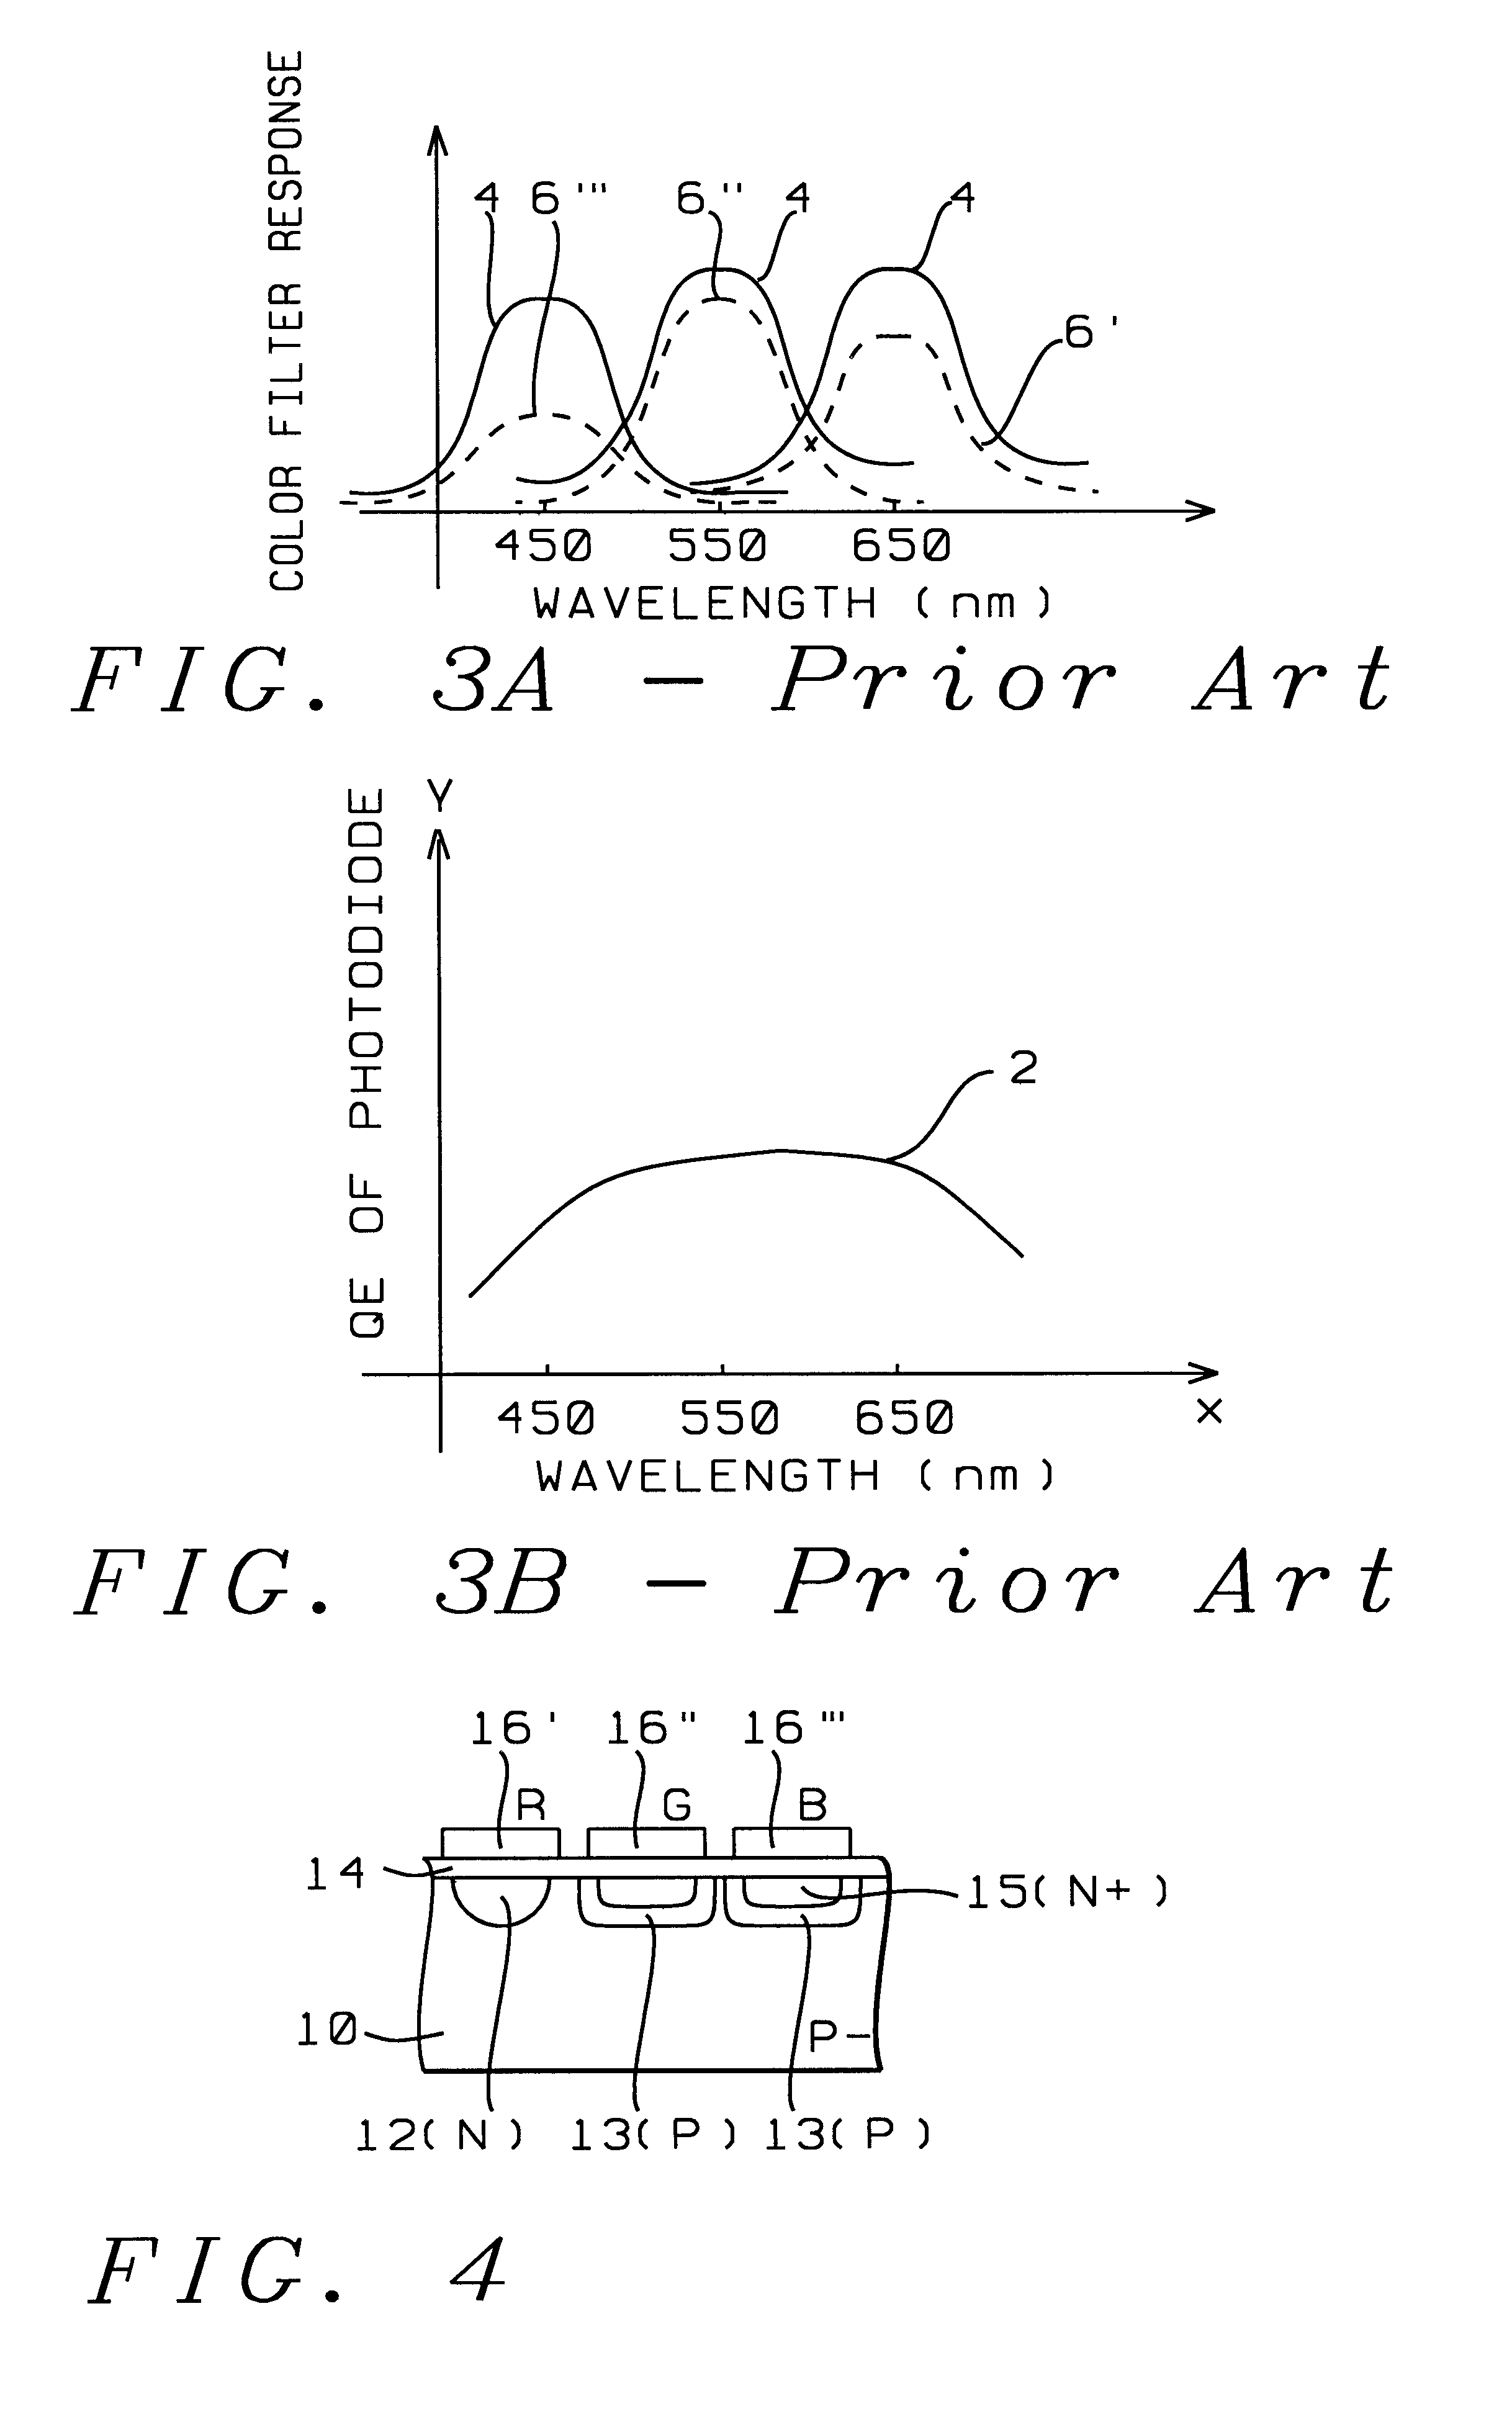 Method for making spectrally efficient photodiode structures for CMOS color imagers